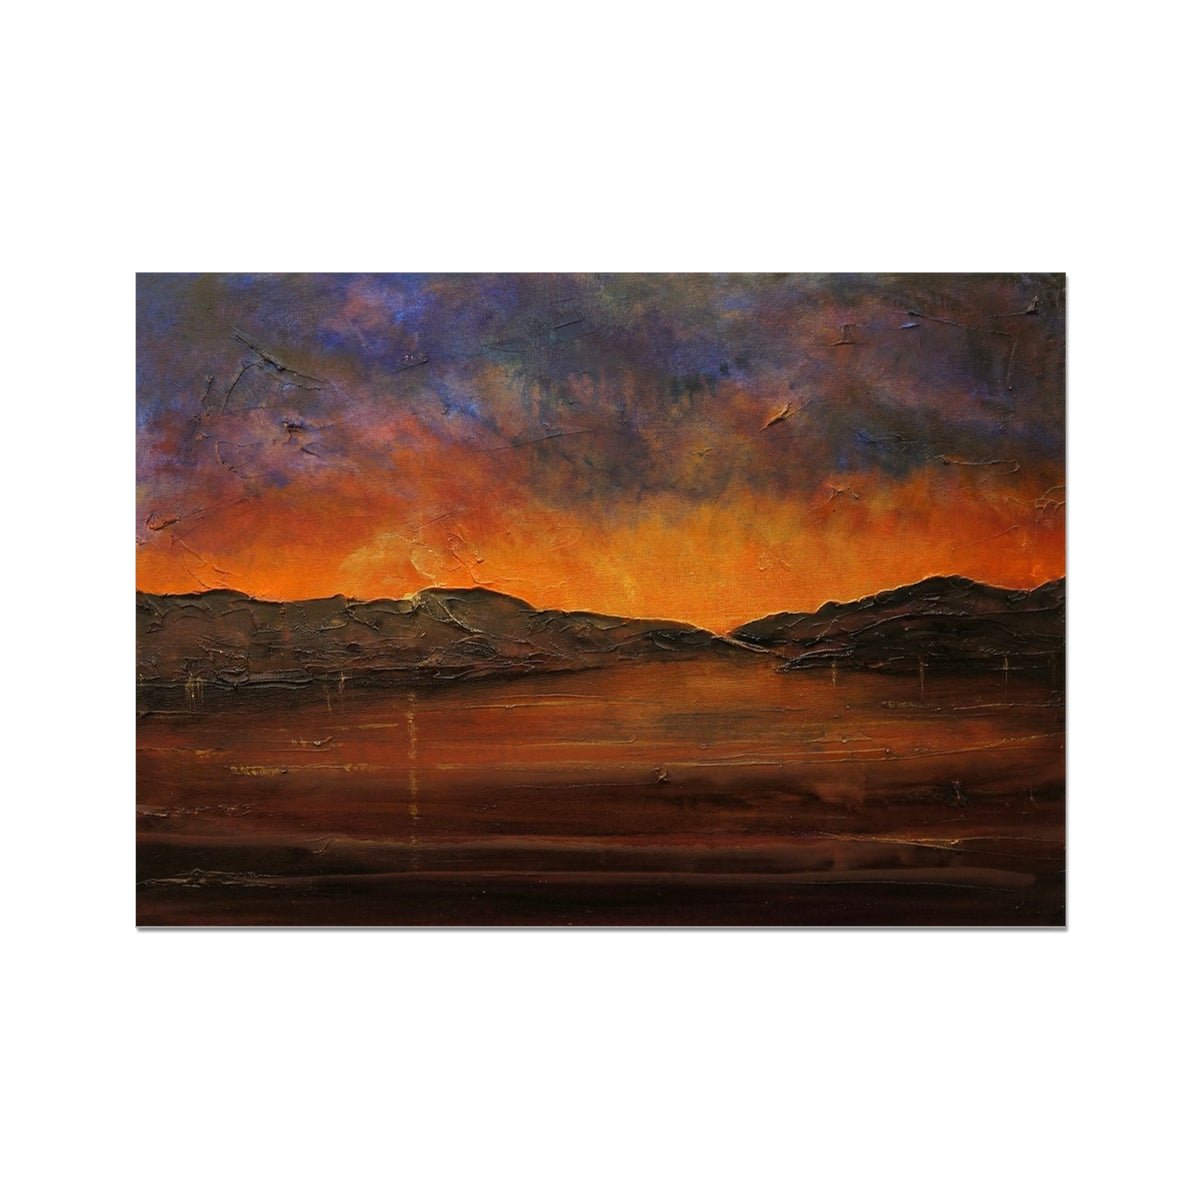 A Brooding River Clyde Dusk Painting | Fine Art Prints From Scotland-Unframed Prints-River Clyde Art Gallery-A2 Landscape-Paintings, Prints, Homeware, Art Gifts From Scotland By Scottish Artist Kevin Hunter